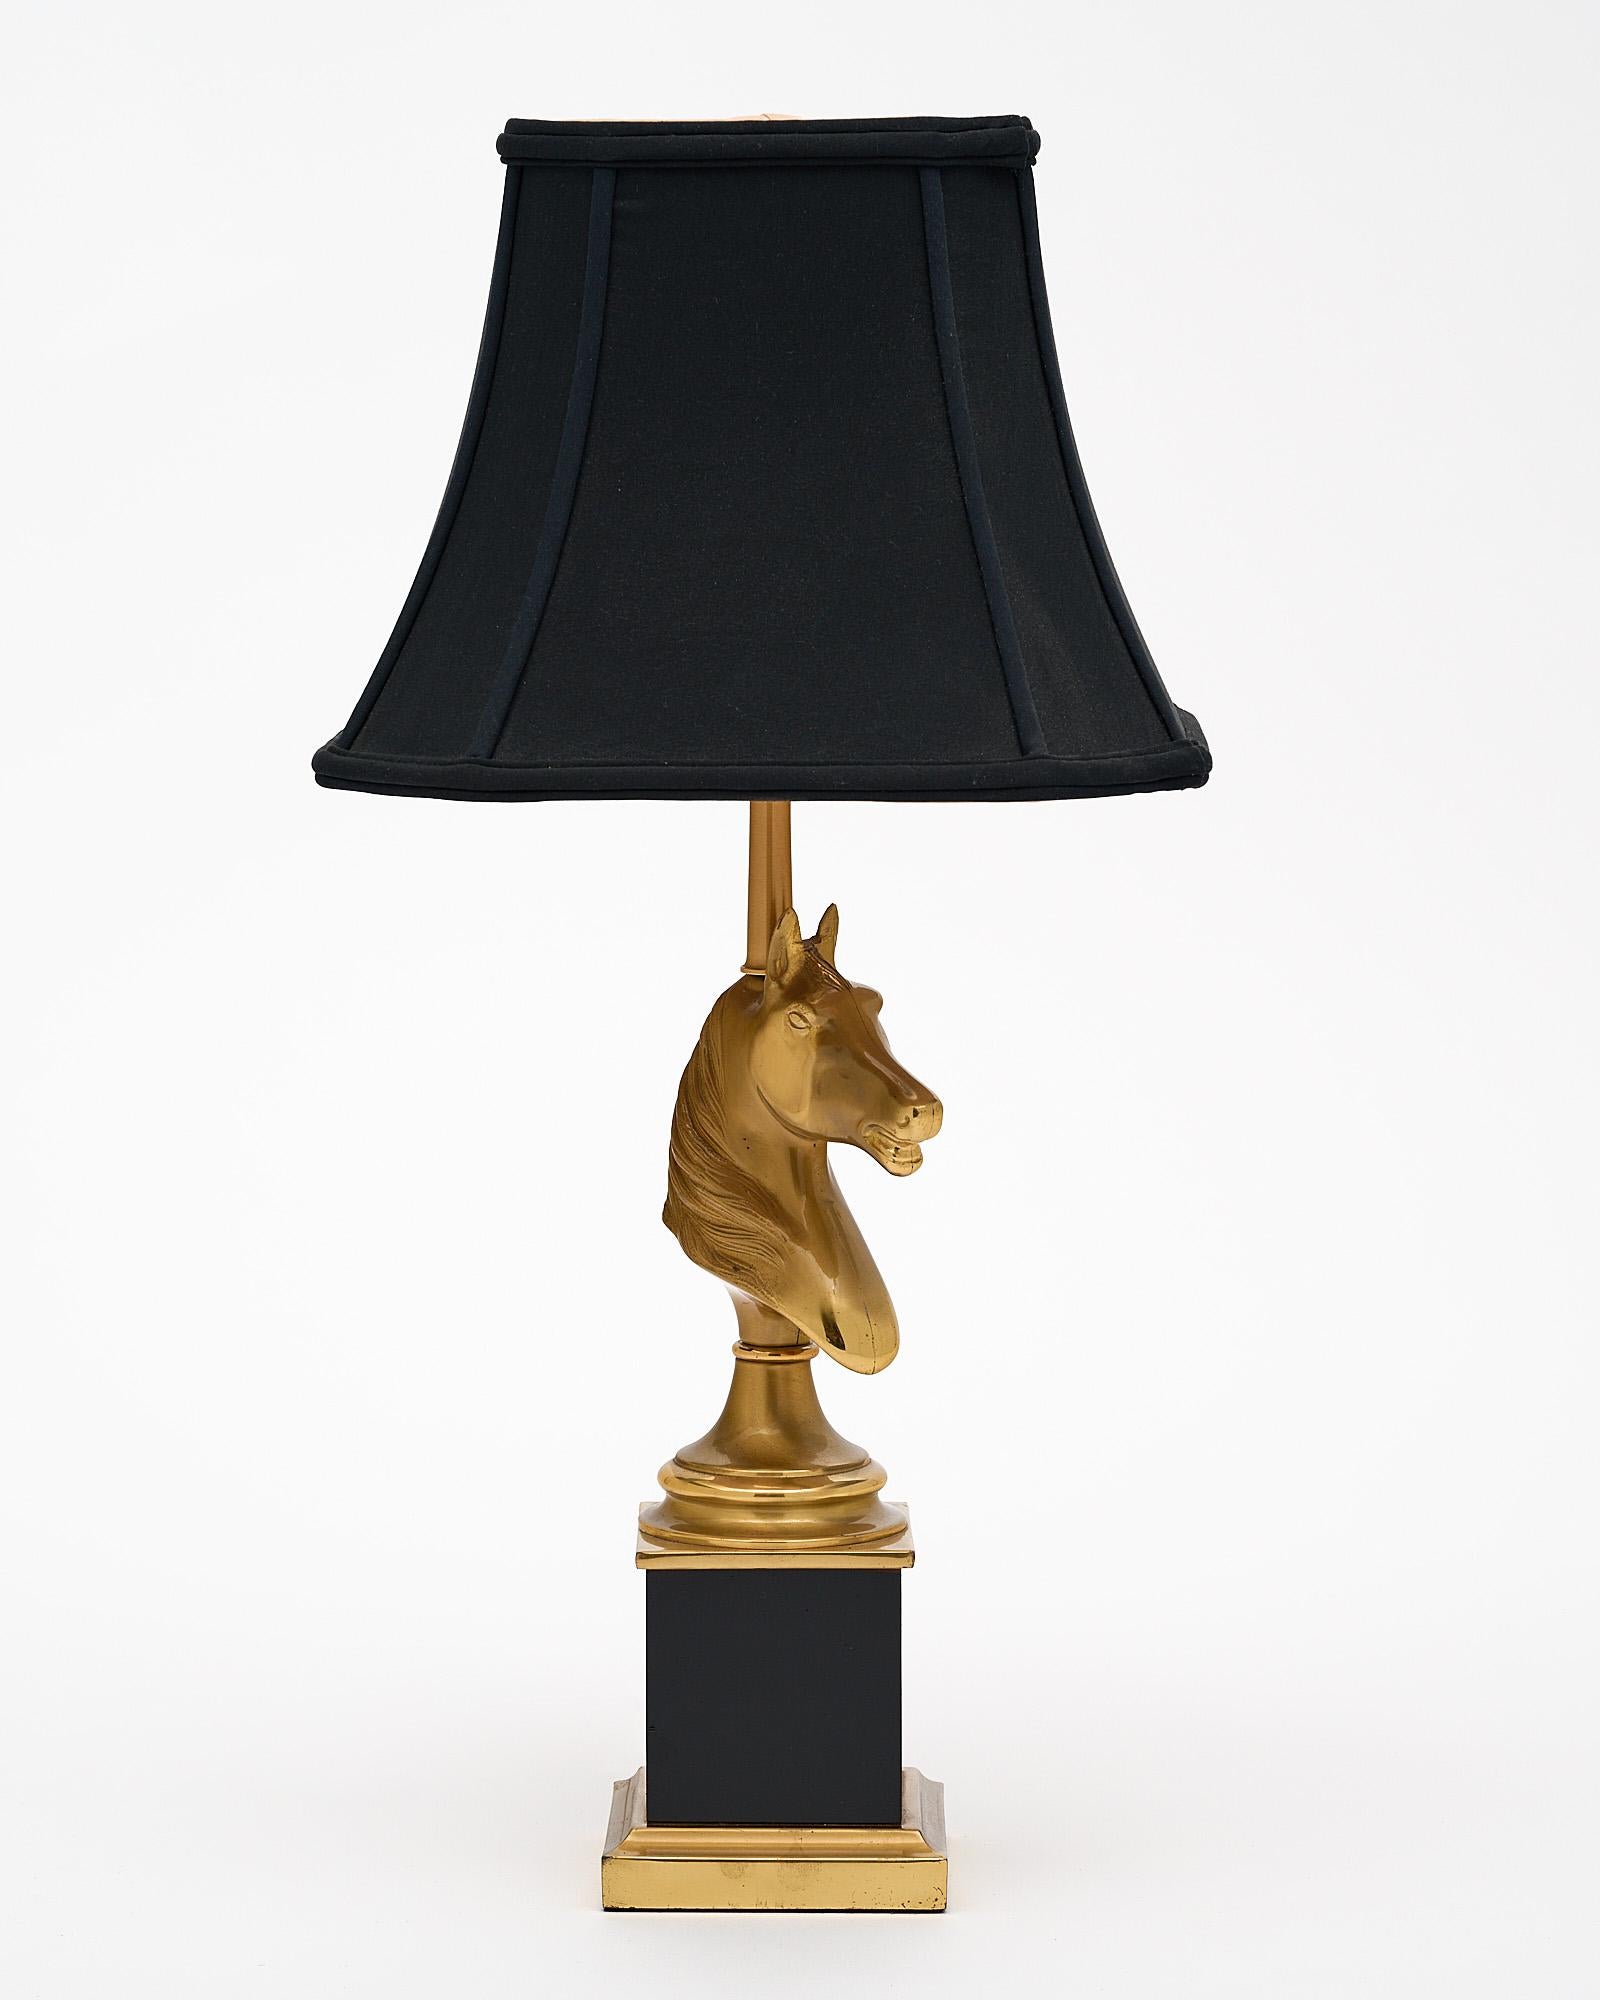 A French Maison Charles vintage brass horse-head lamp. This piece is made by the iconic Parisian design power house Maison Charles. We love this strong, unique piece. This lamp has been newly wired to fit US standards.